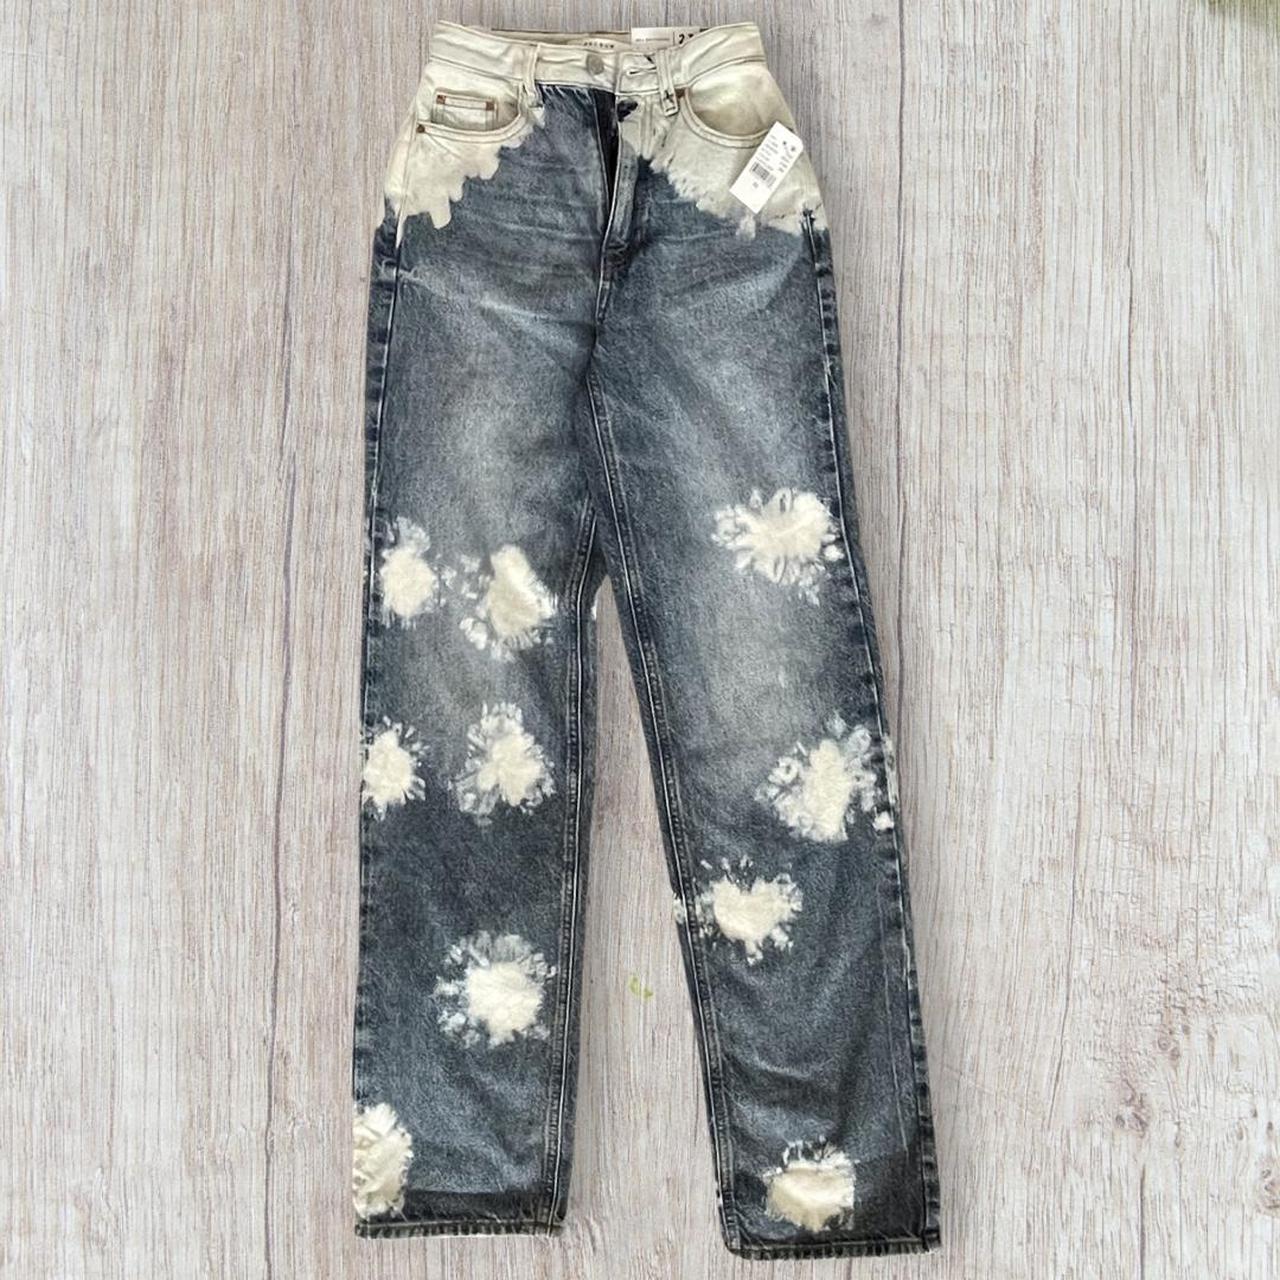 PacSun Women's Blue and White Jeans